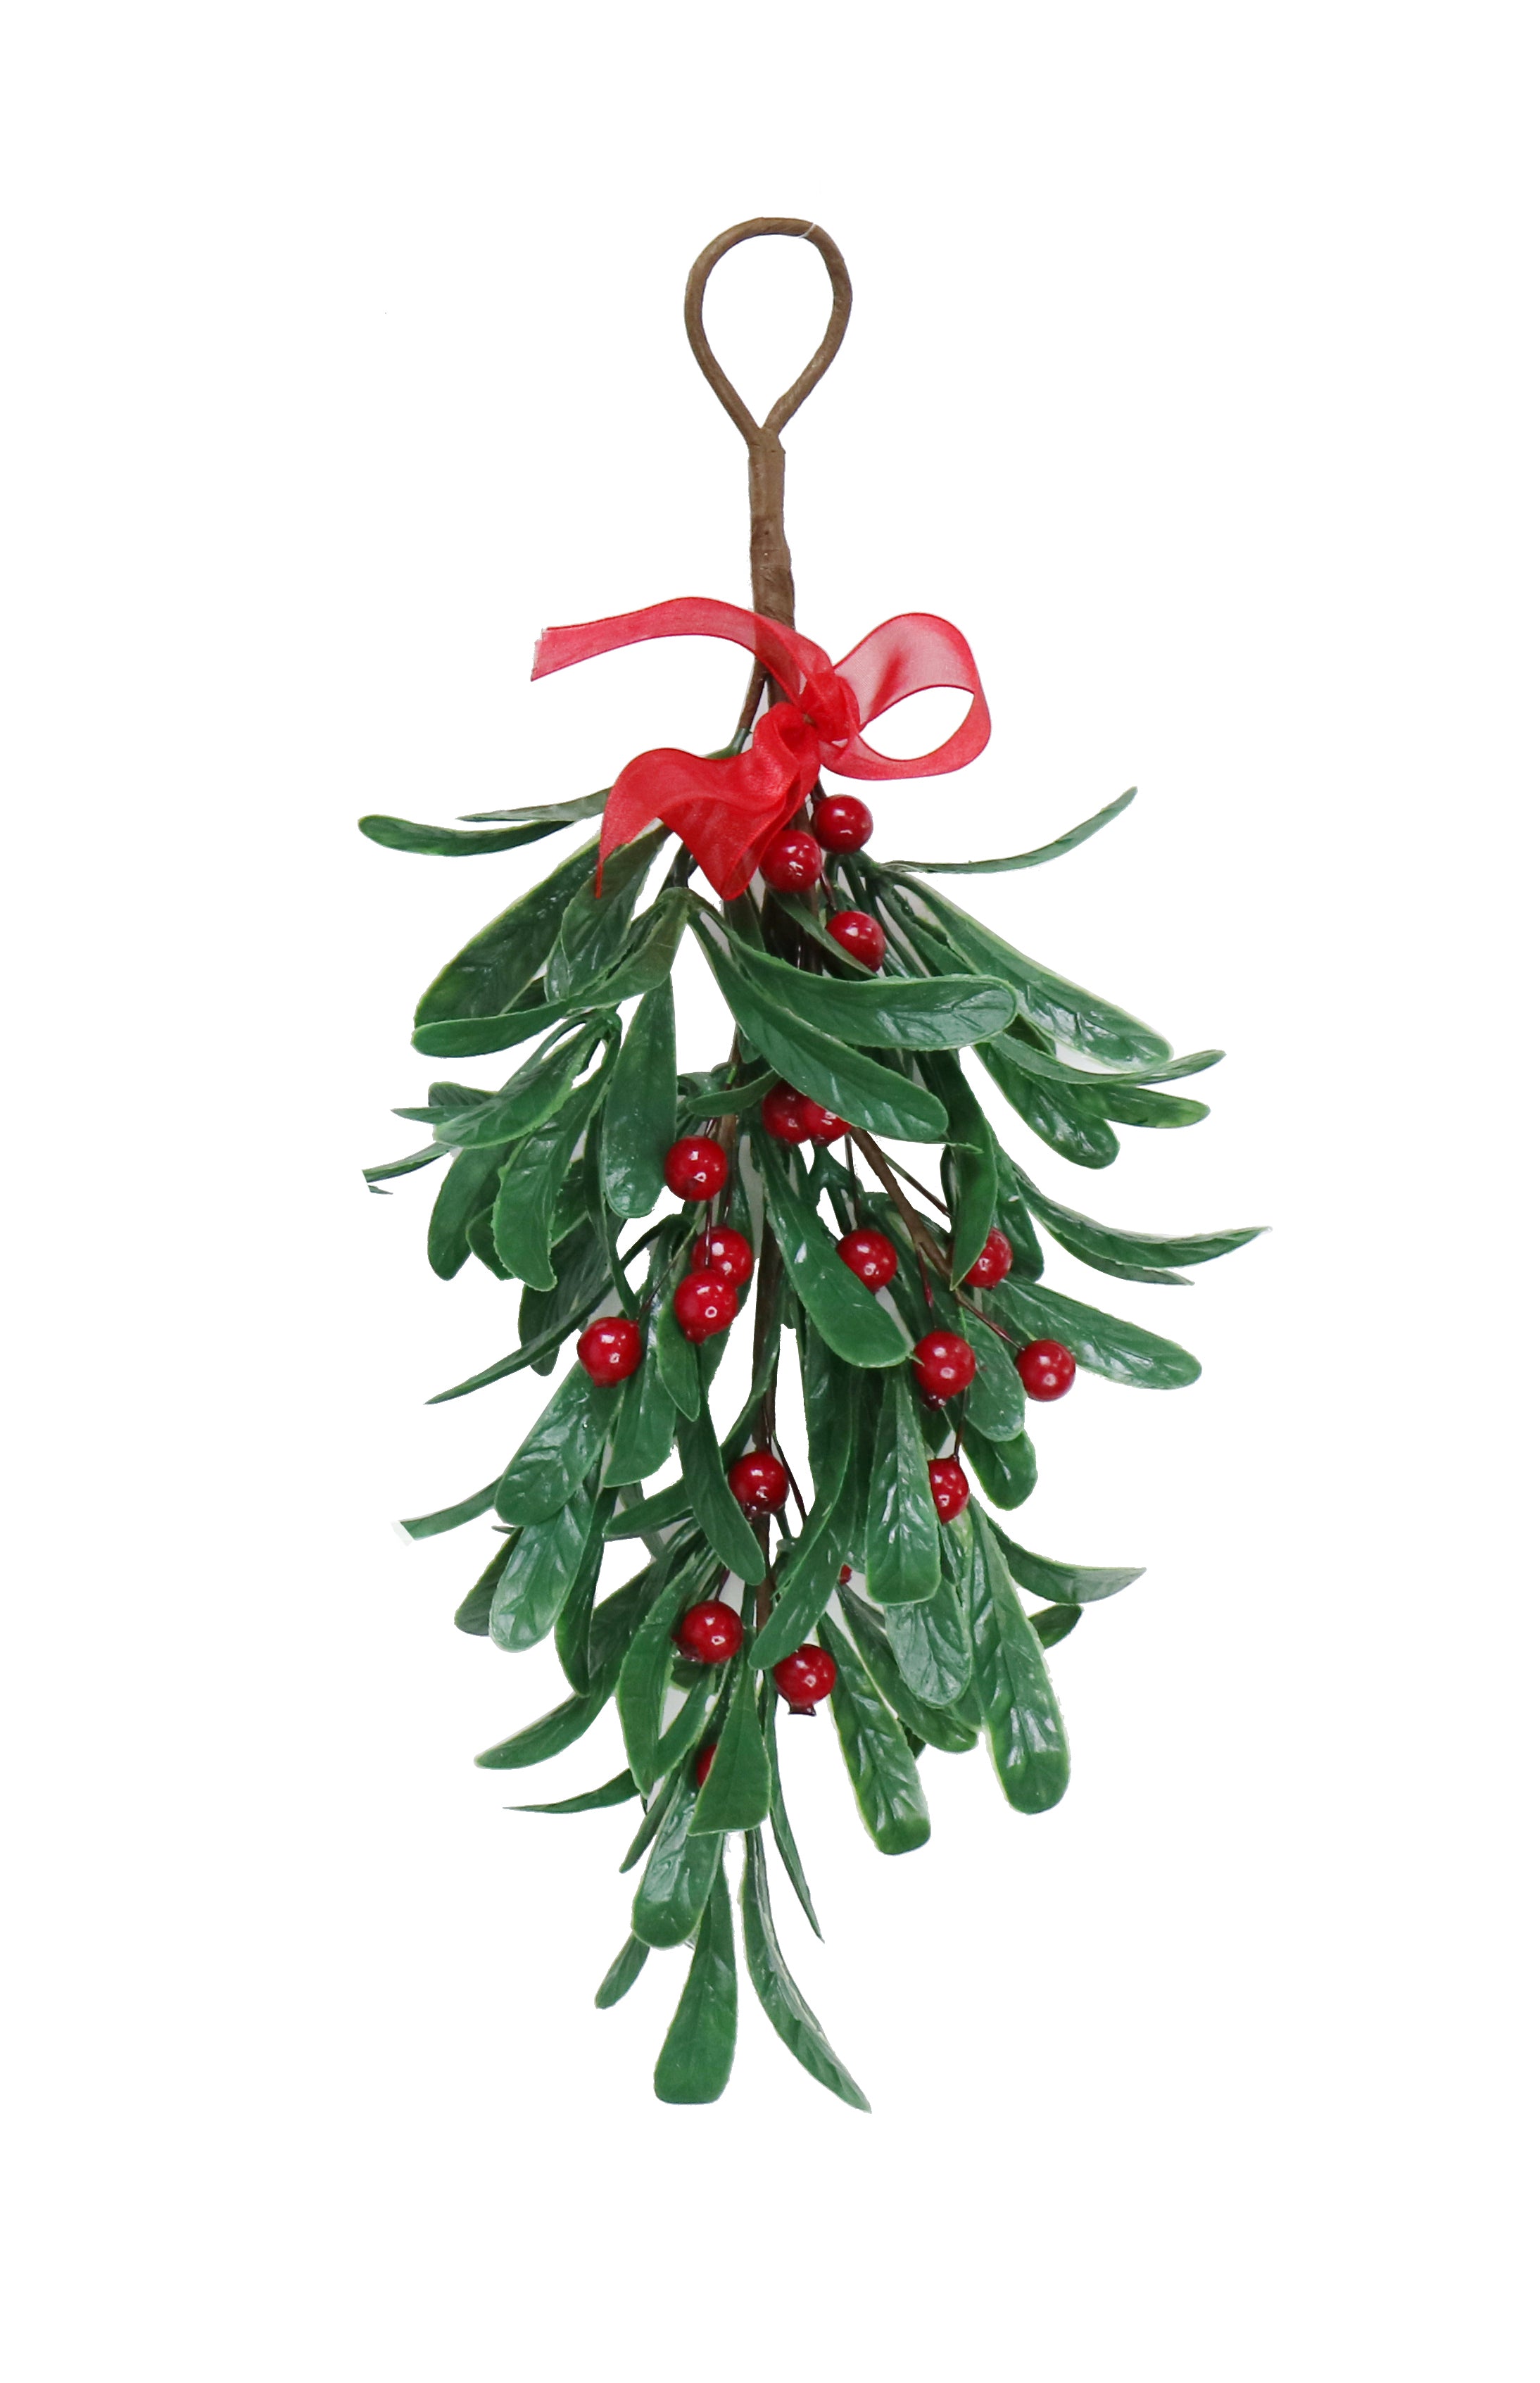 Christmas Hanging Decoration - Mistletoe With Red Berries and Red Bow, 35cm, 1pc